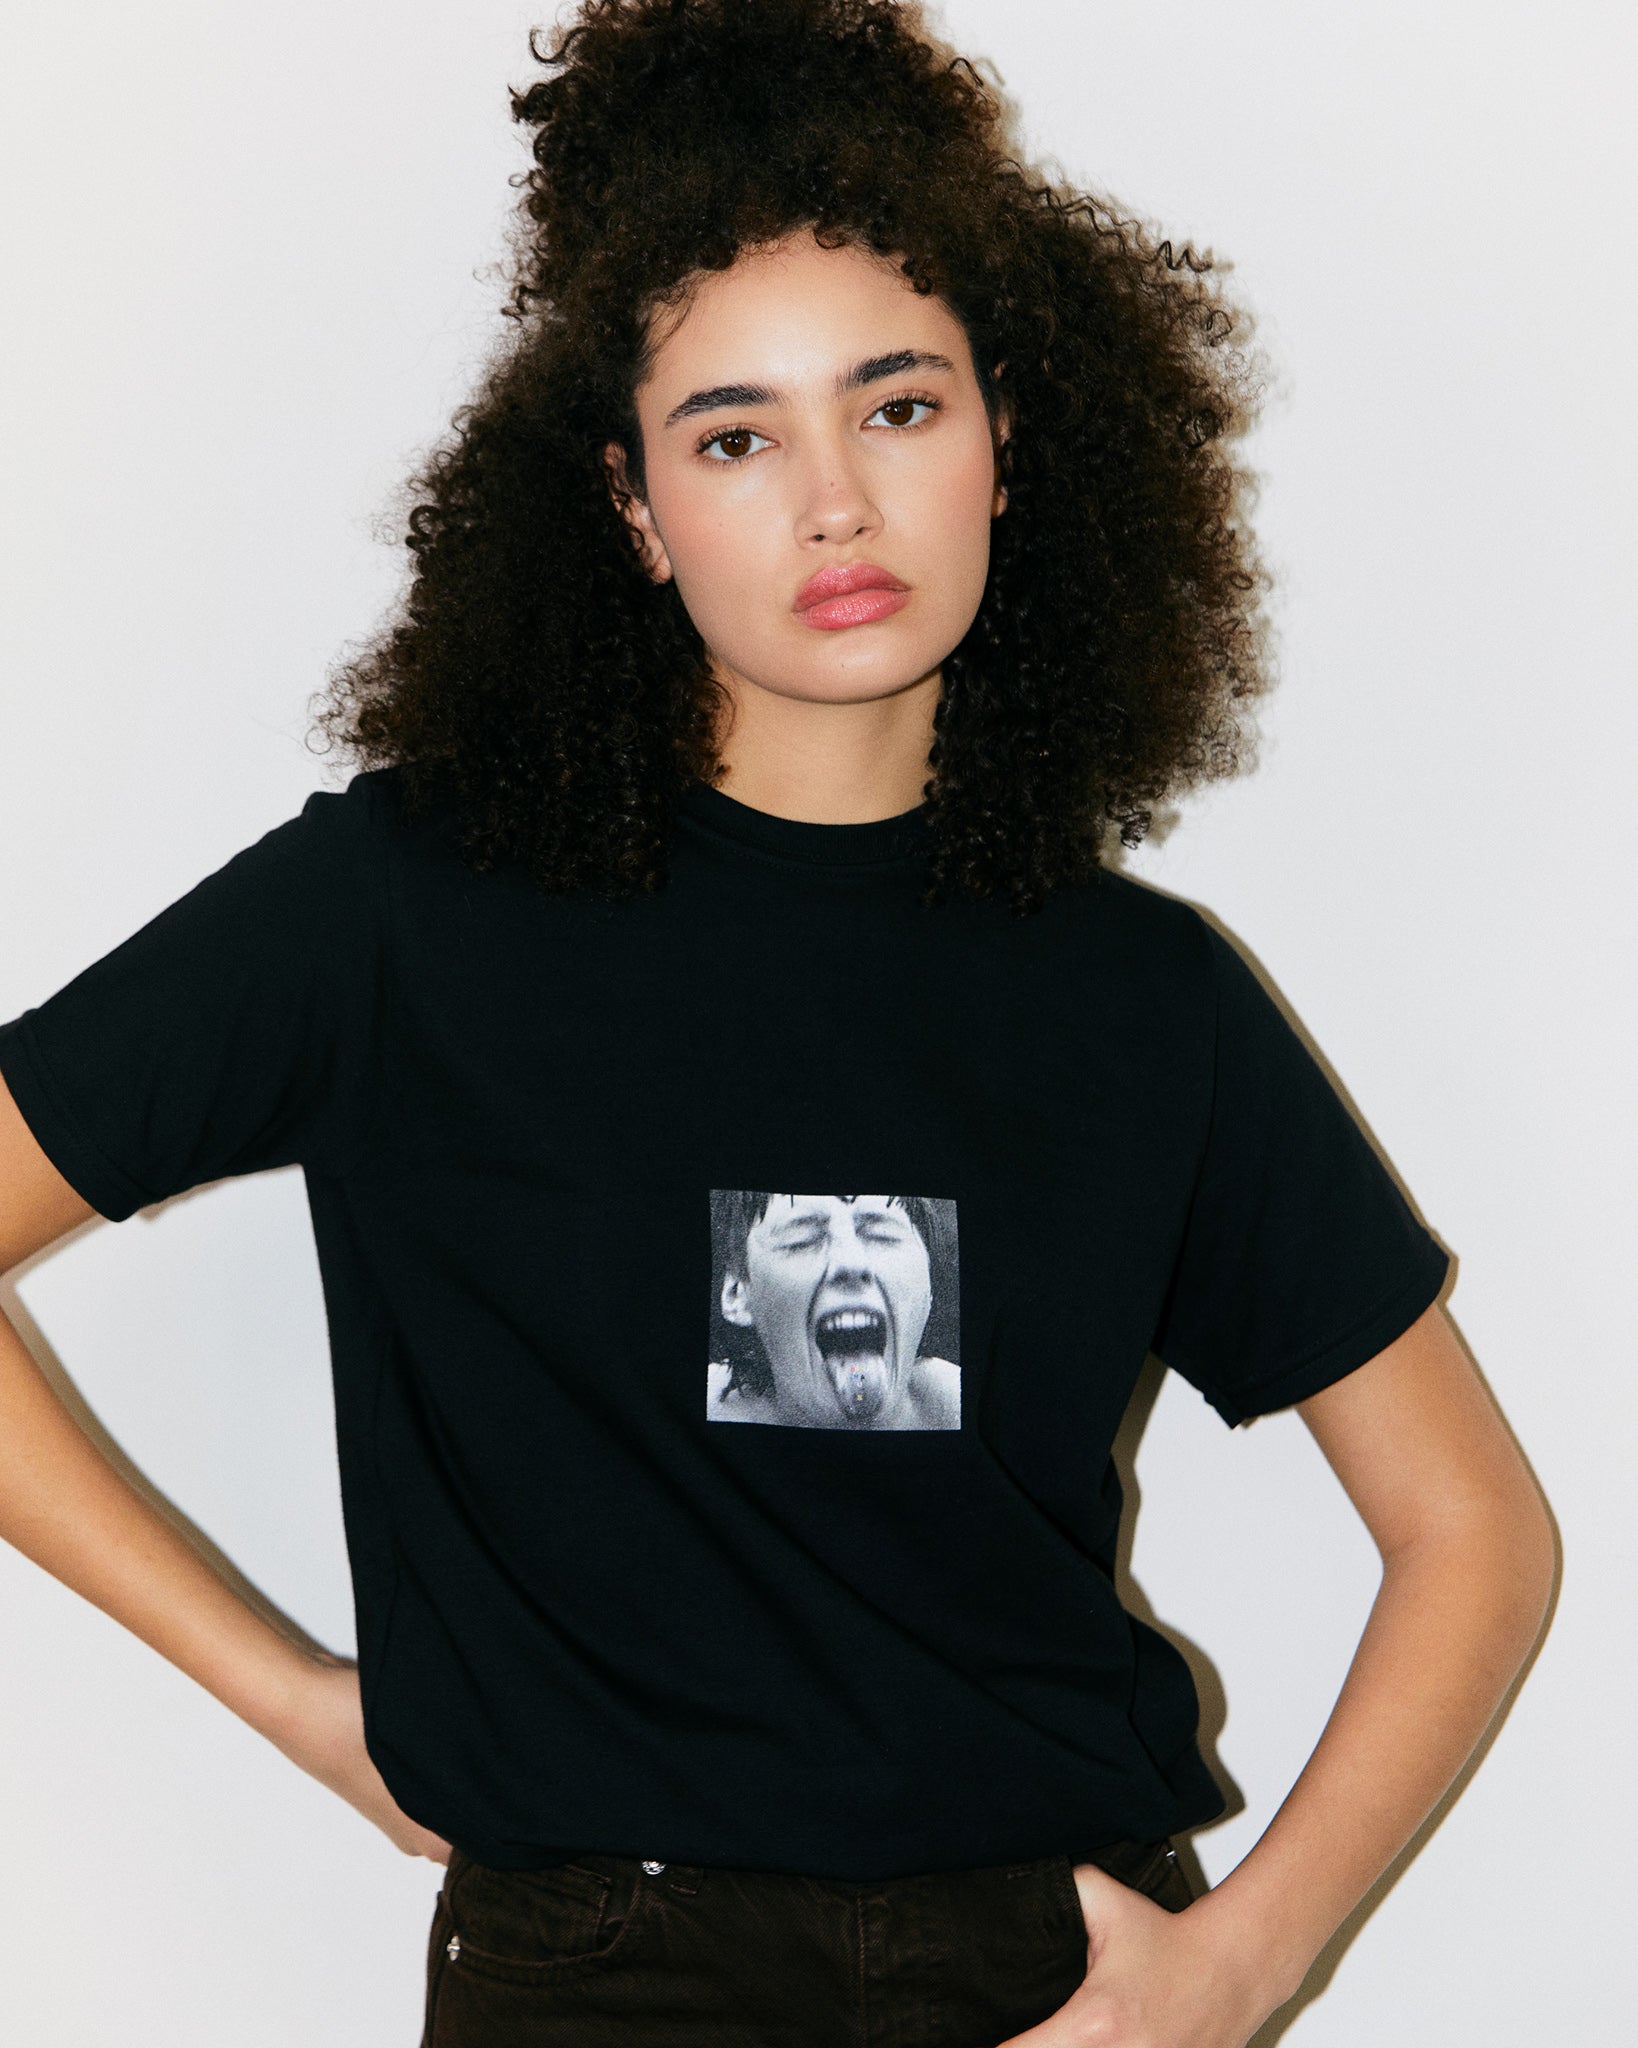 Teo Marcella Wears 100% Cotton Black Tee with Bauhaus Girl Student with Tongue Out and Bauhaus Graphic Text.